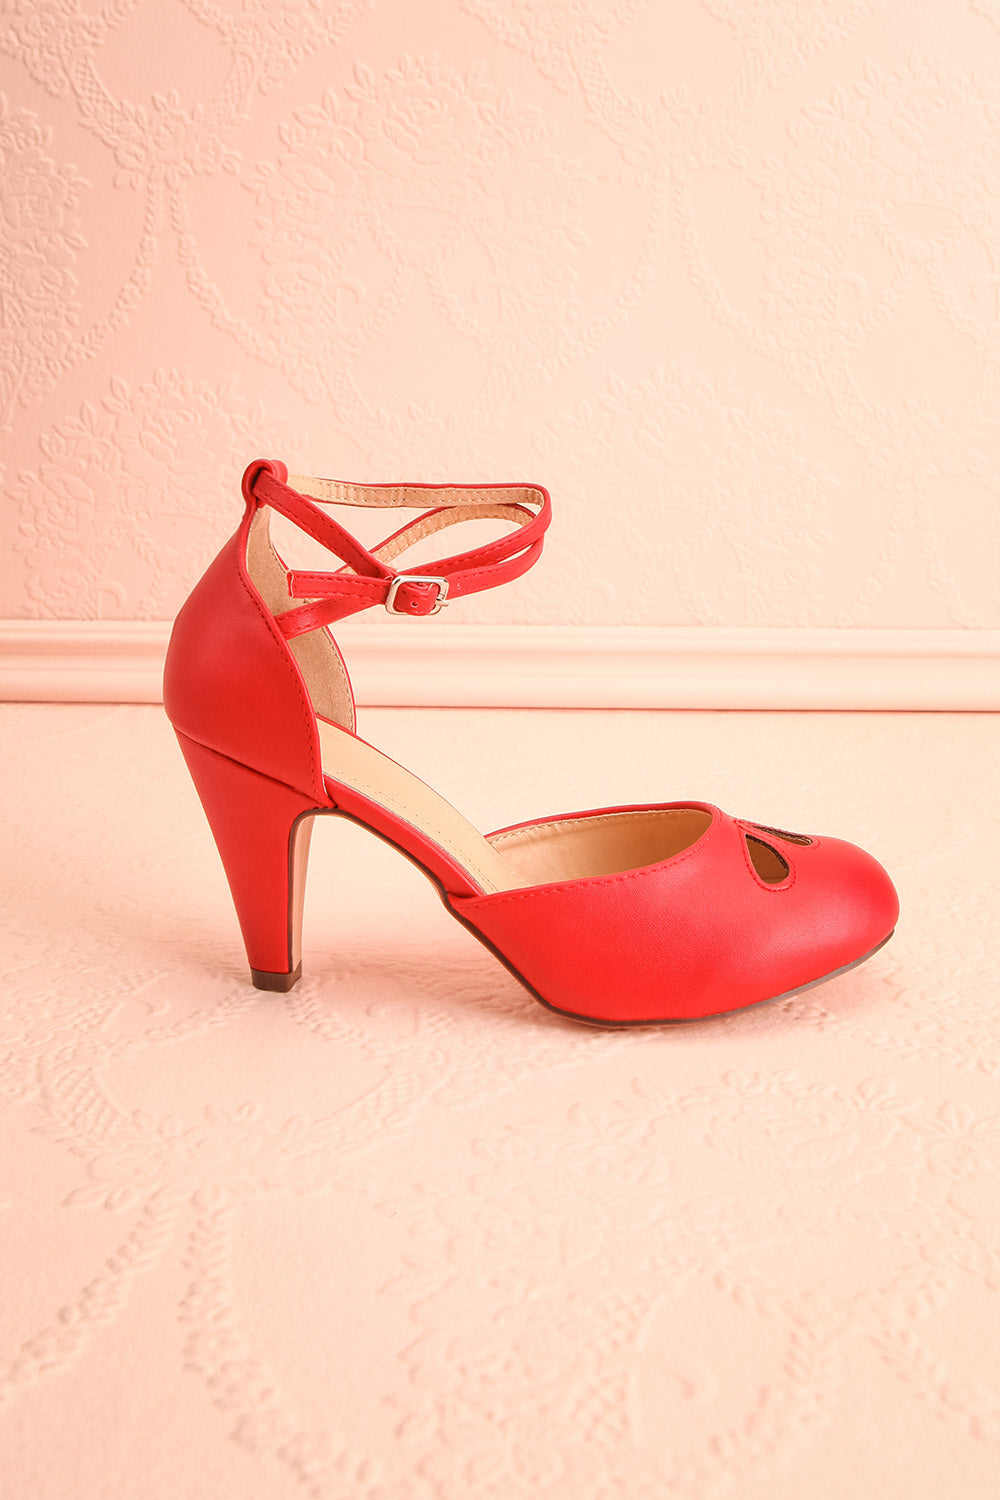 Sapinette Red Round Toe Heeled Shoes | Boutique 1861 side view